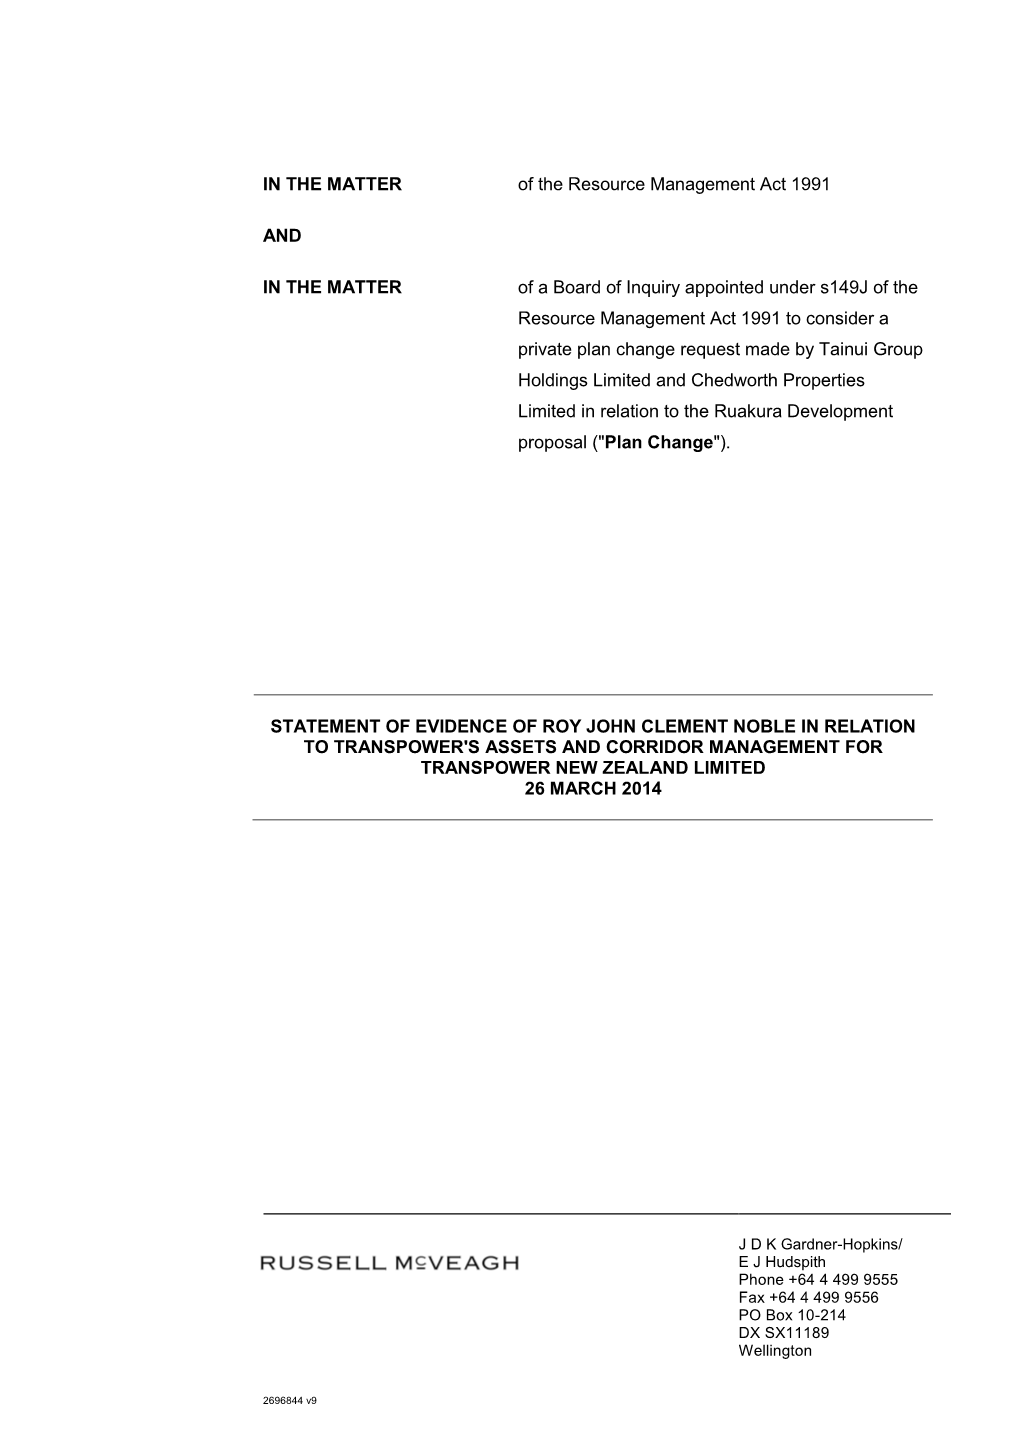 Statement of Evidence of Roy John Clement Noble in Relation to Transpower's Assets and Corridor Management for Transpower New Zealand Limited 26 March 2014